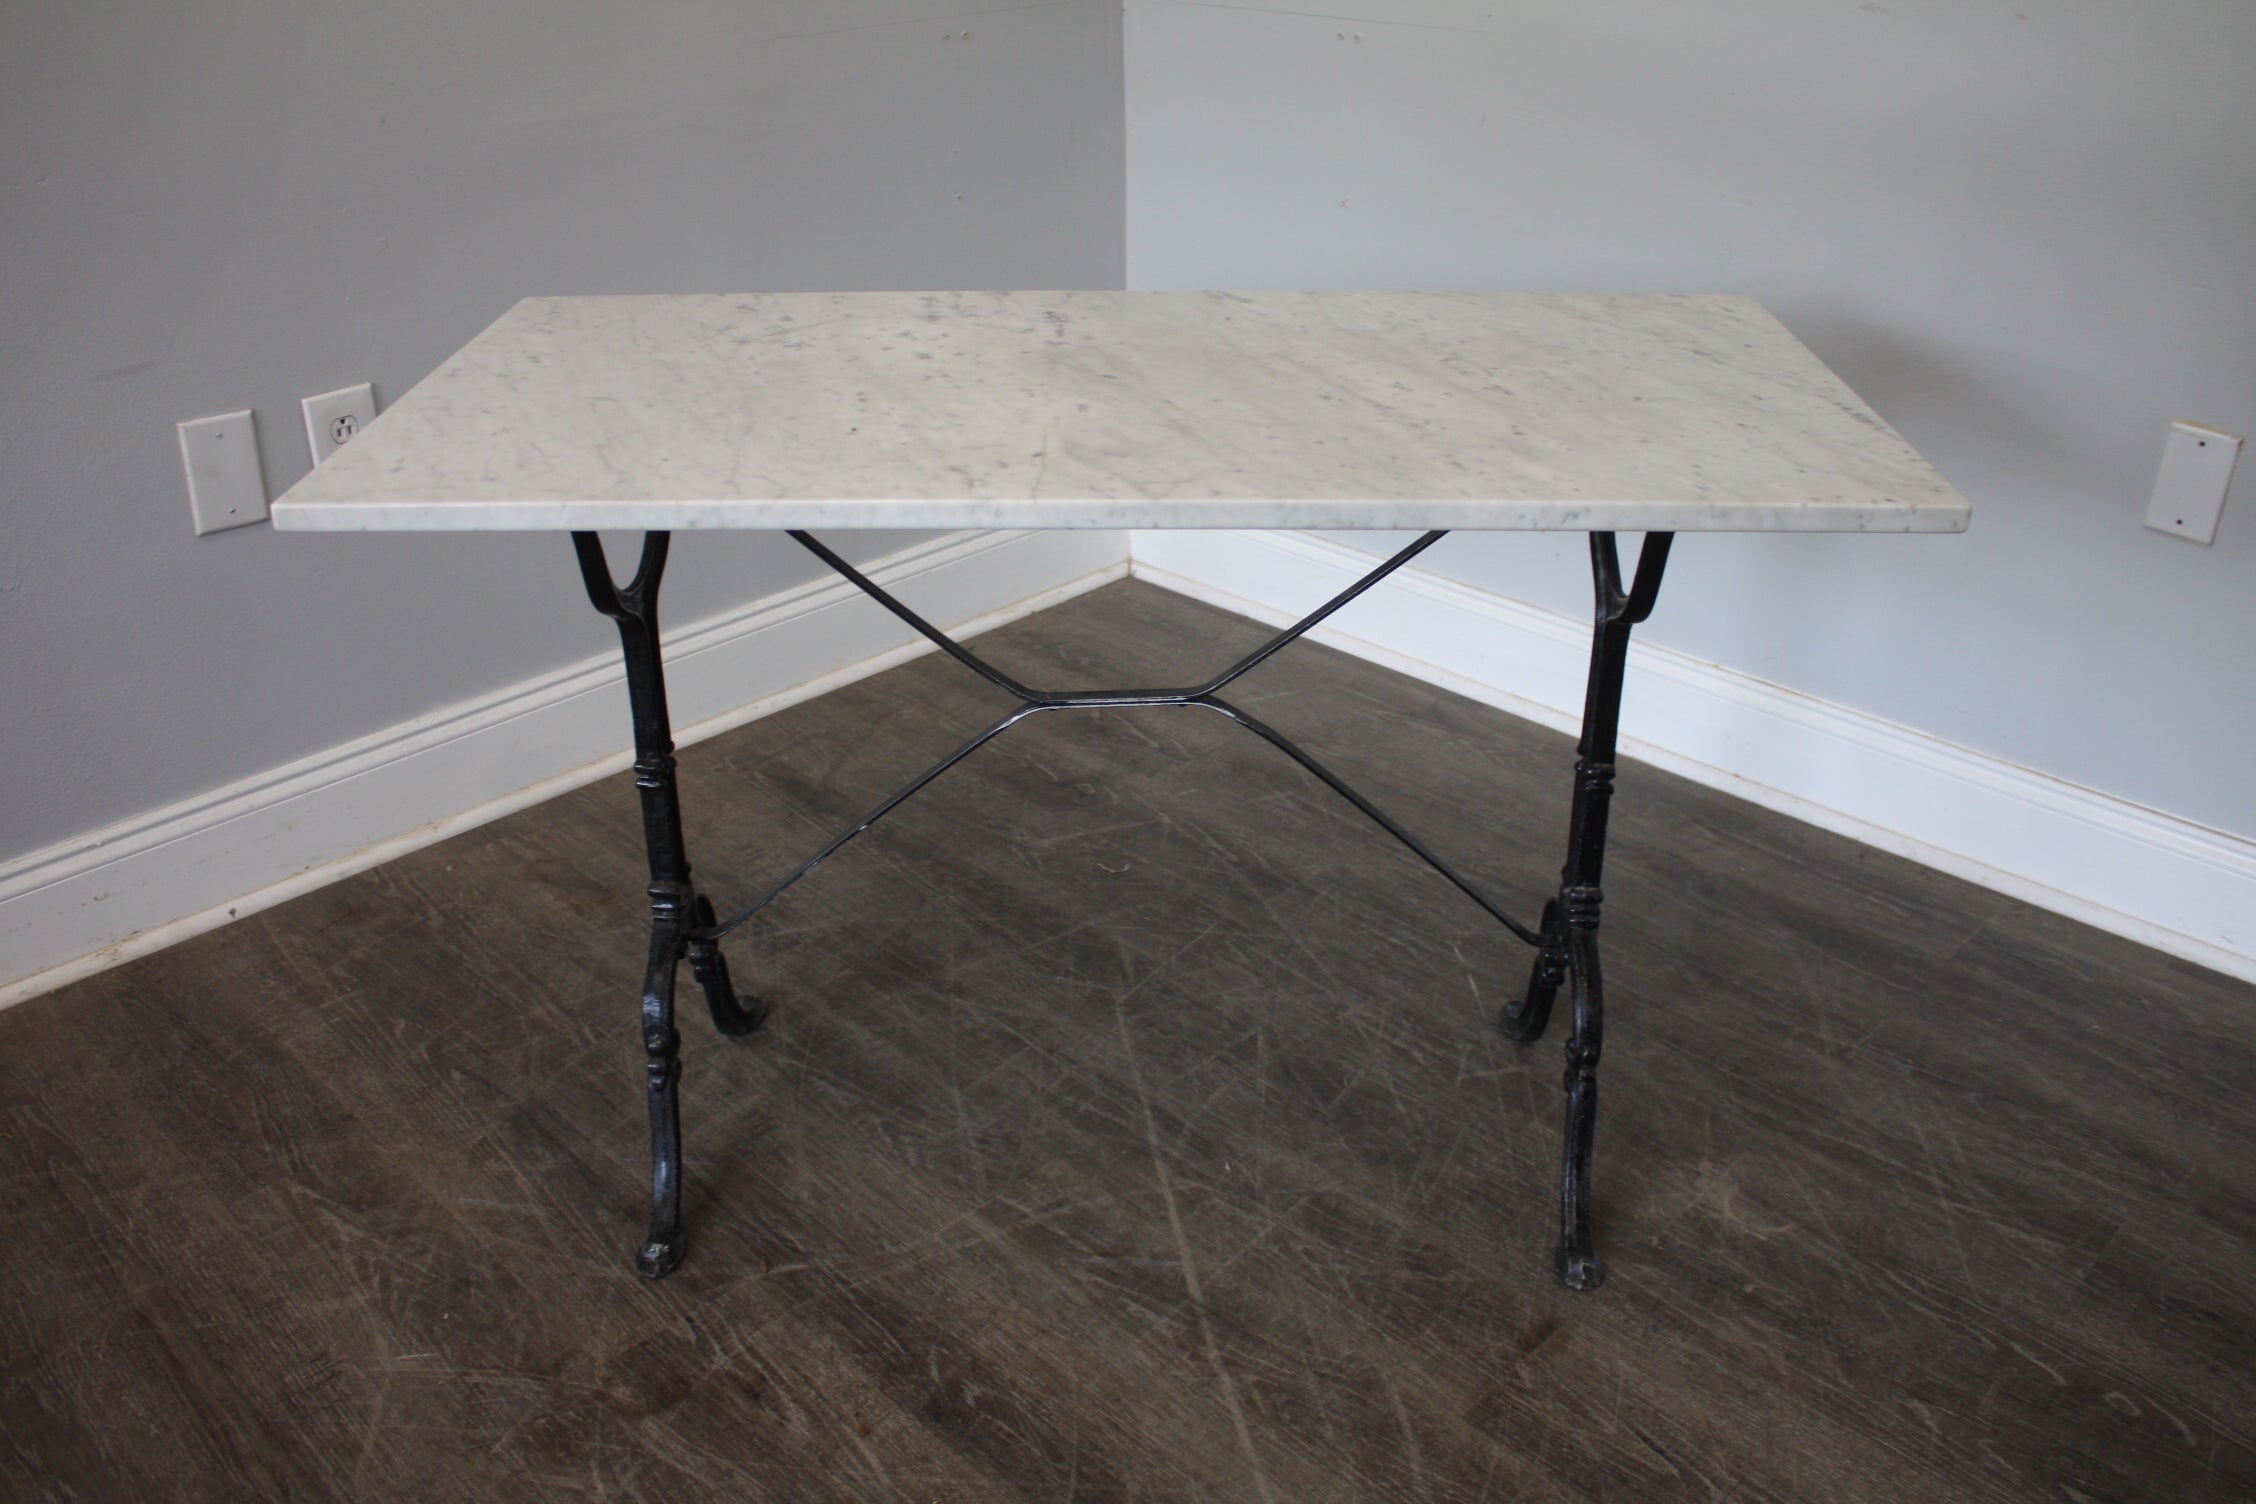 This Bistro Table can be use either inside or outside. It is made of cast iron black lacquered and a white marble top.